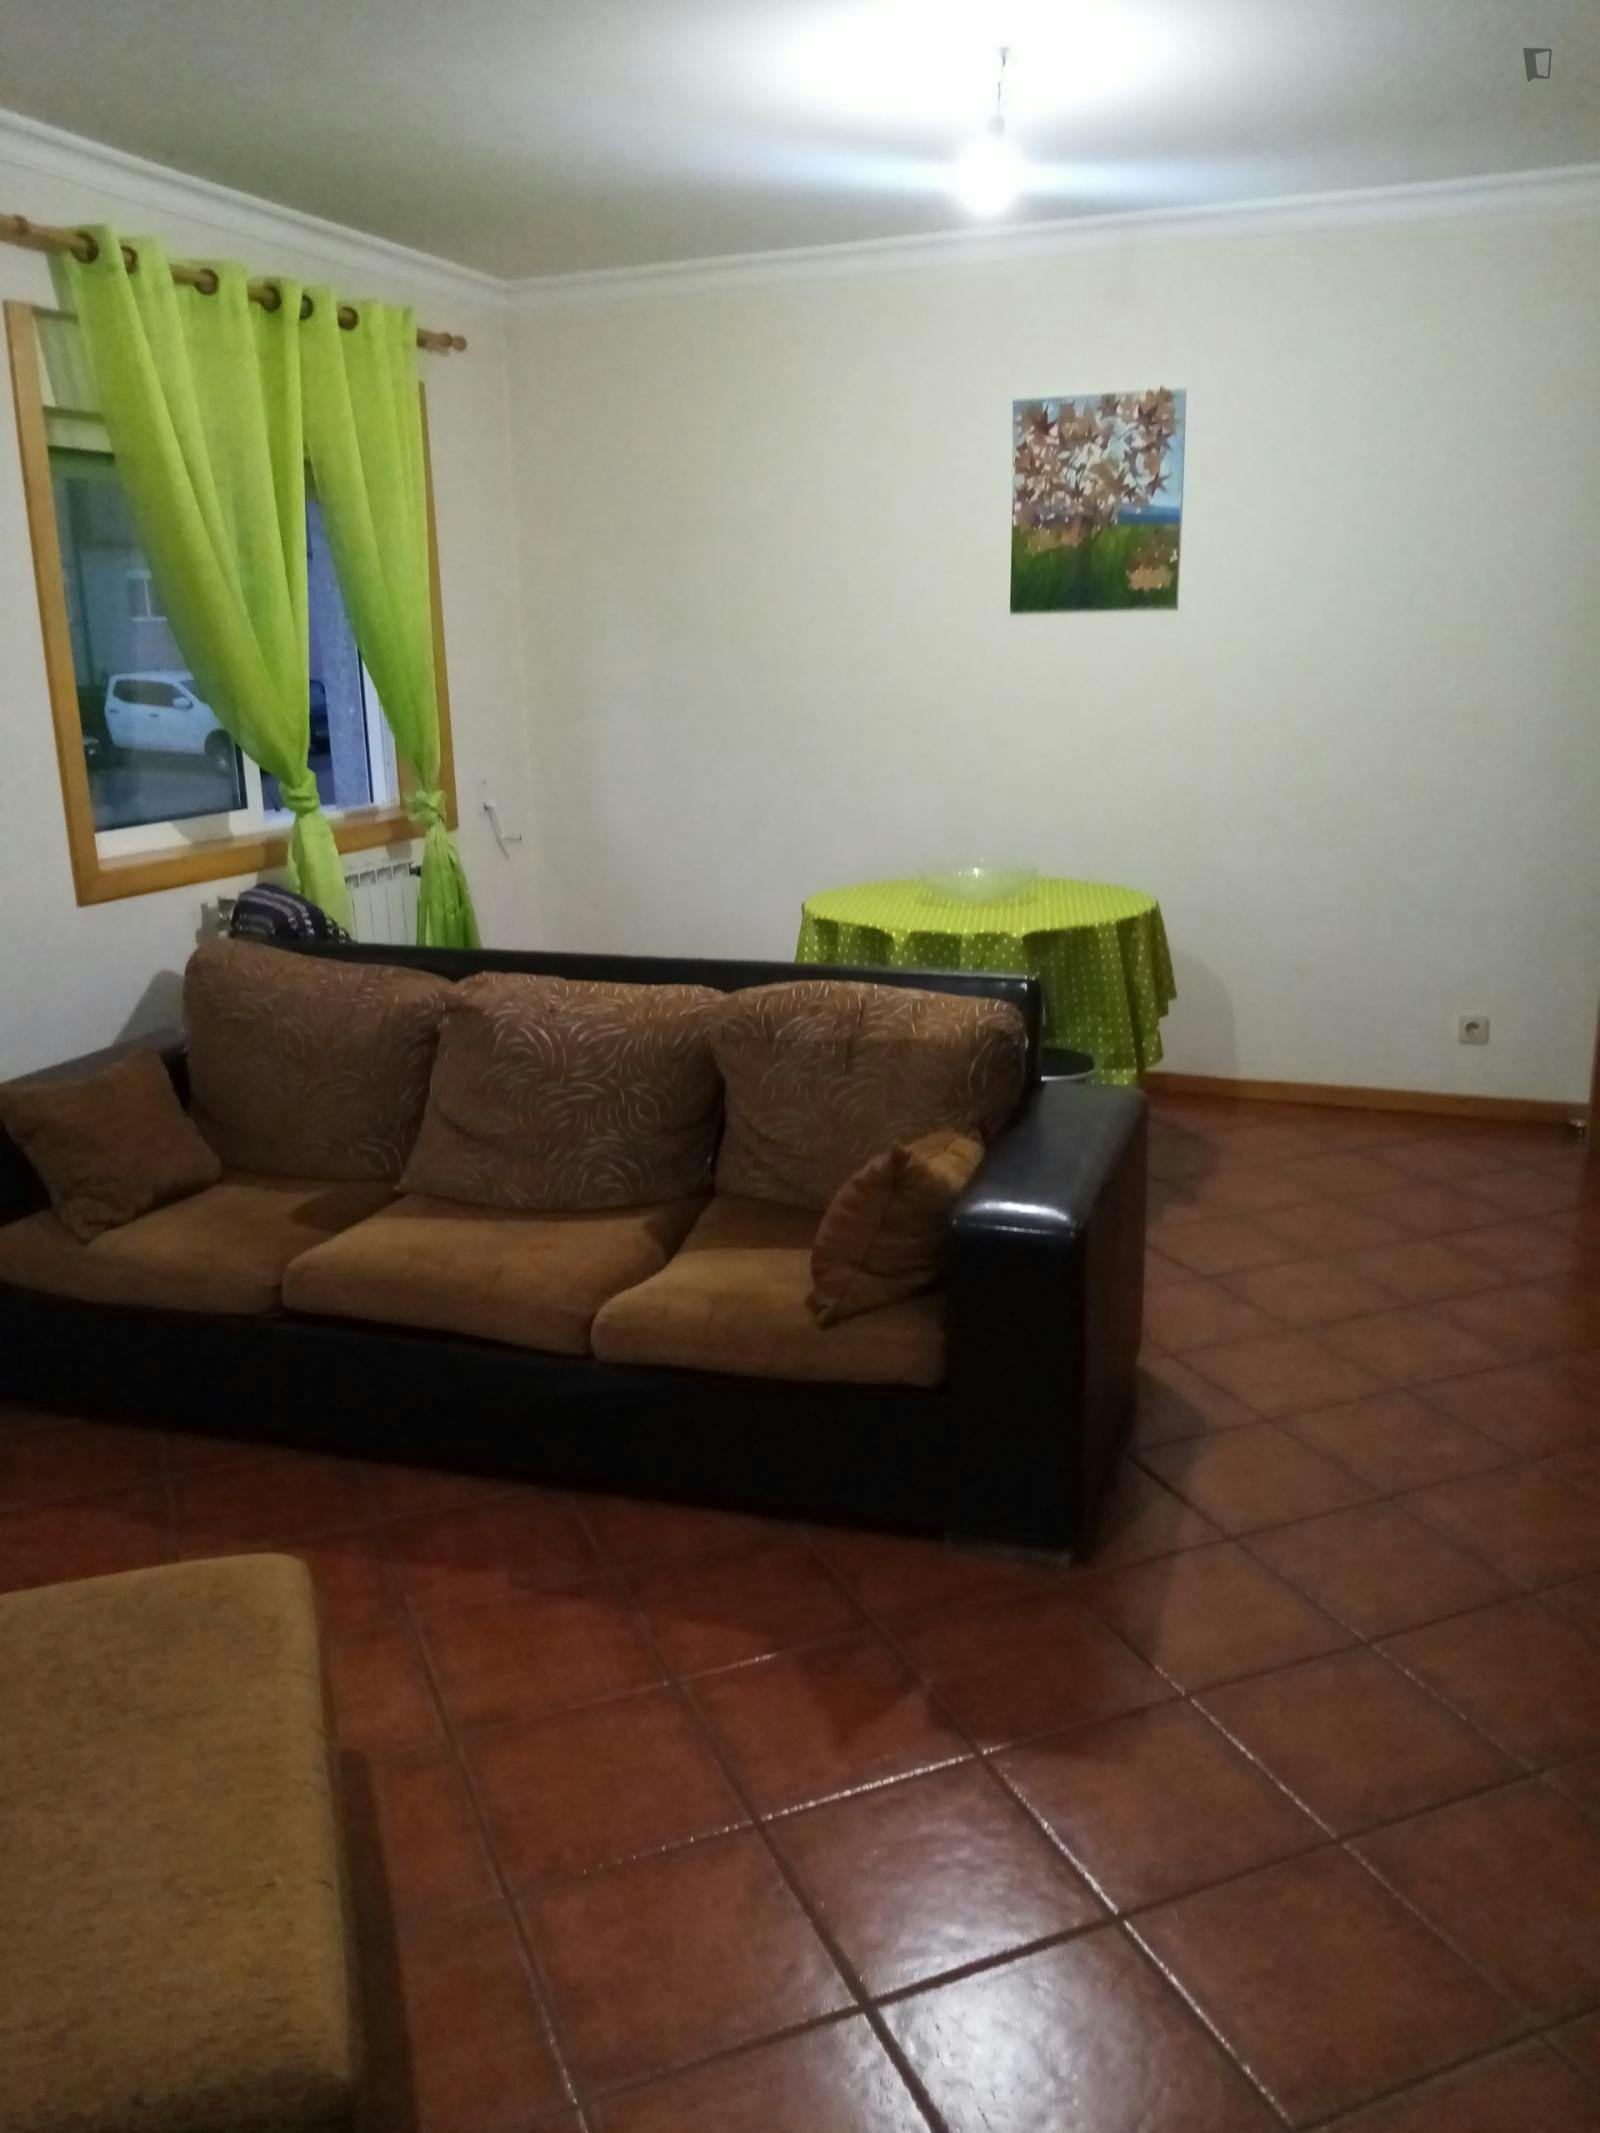 Welcoming 2-bedroom apartment near the centre of Bragança